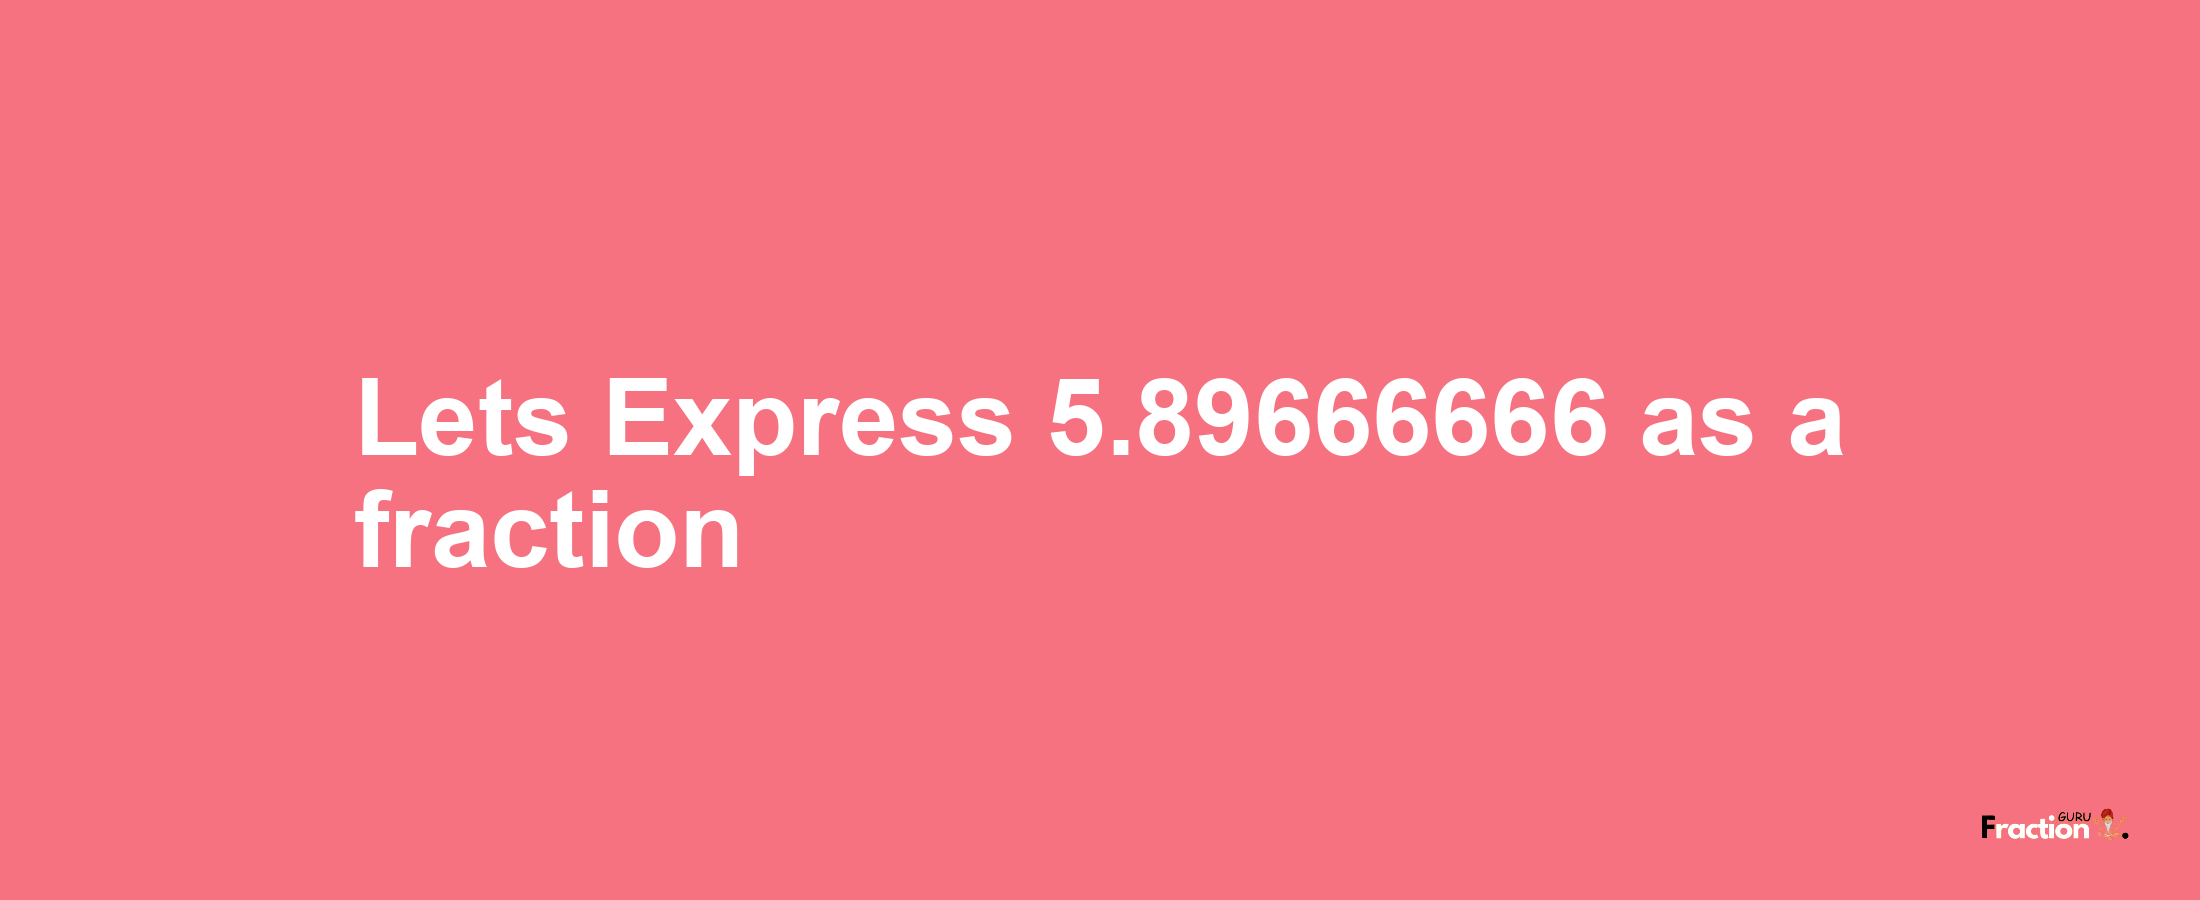 Lets Express 5.89666666 as afraction